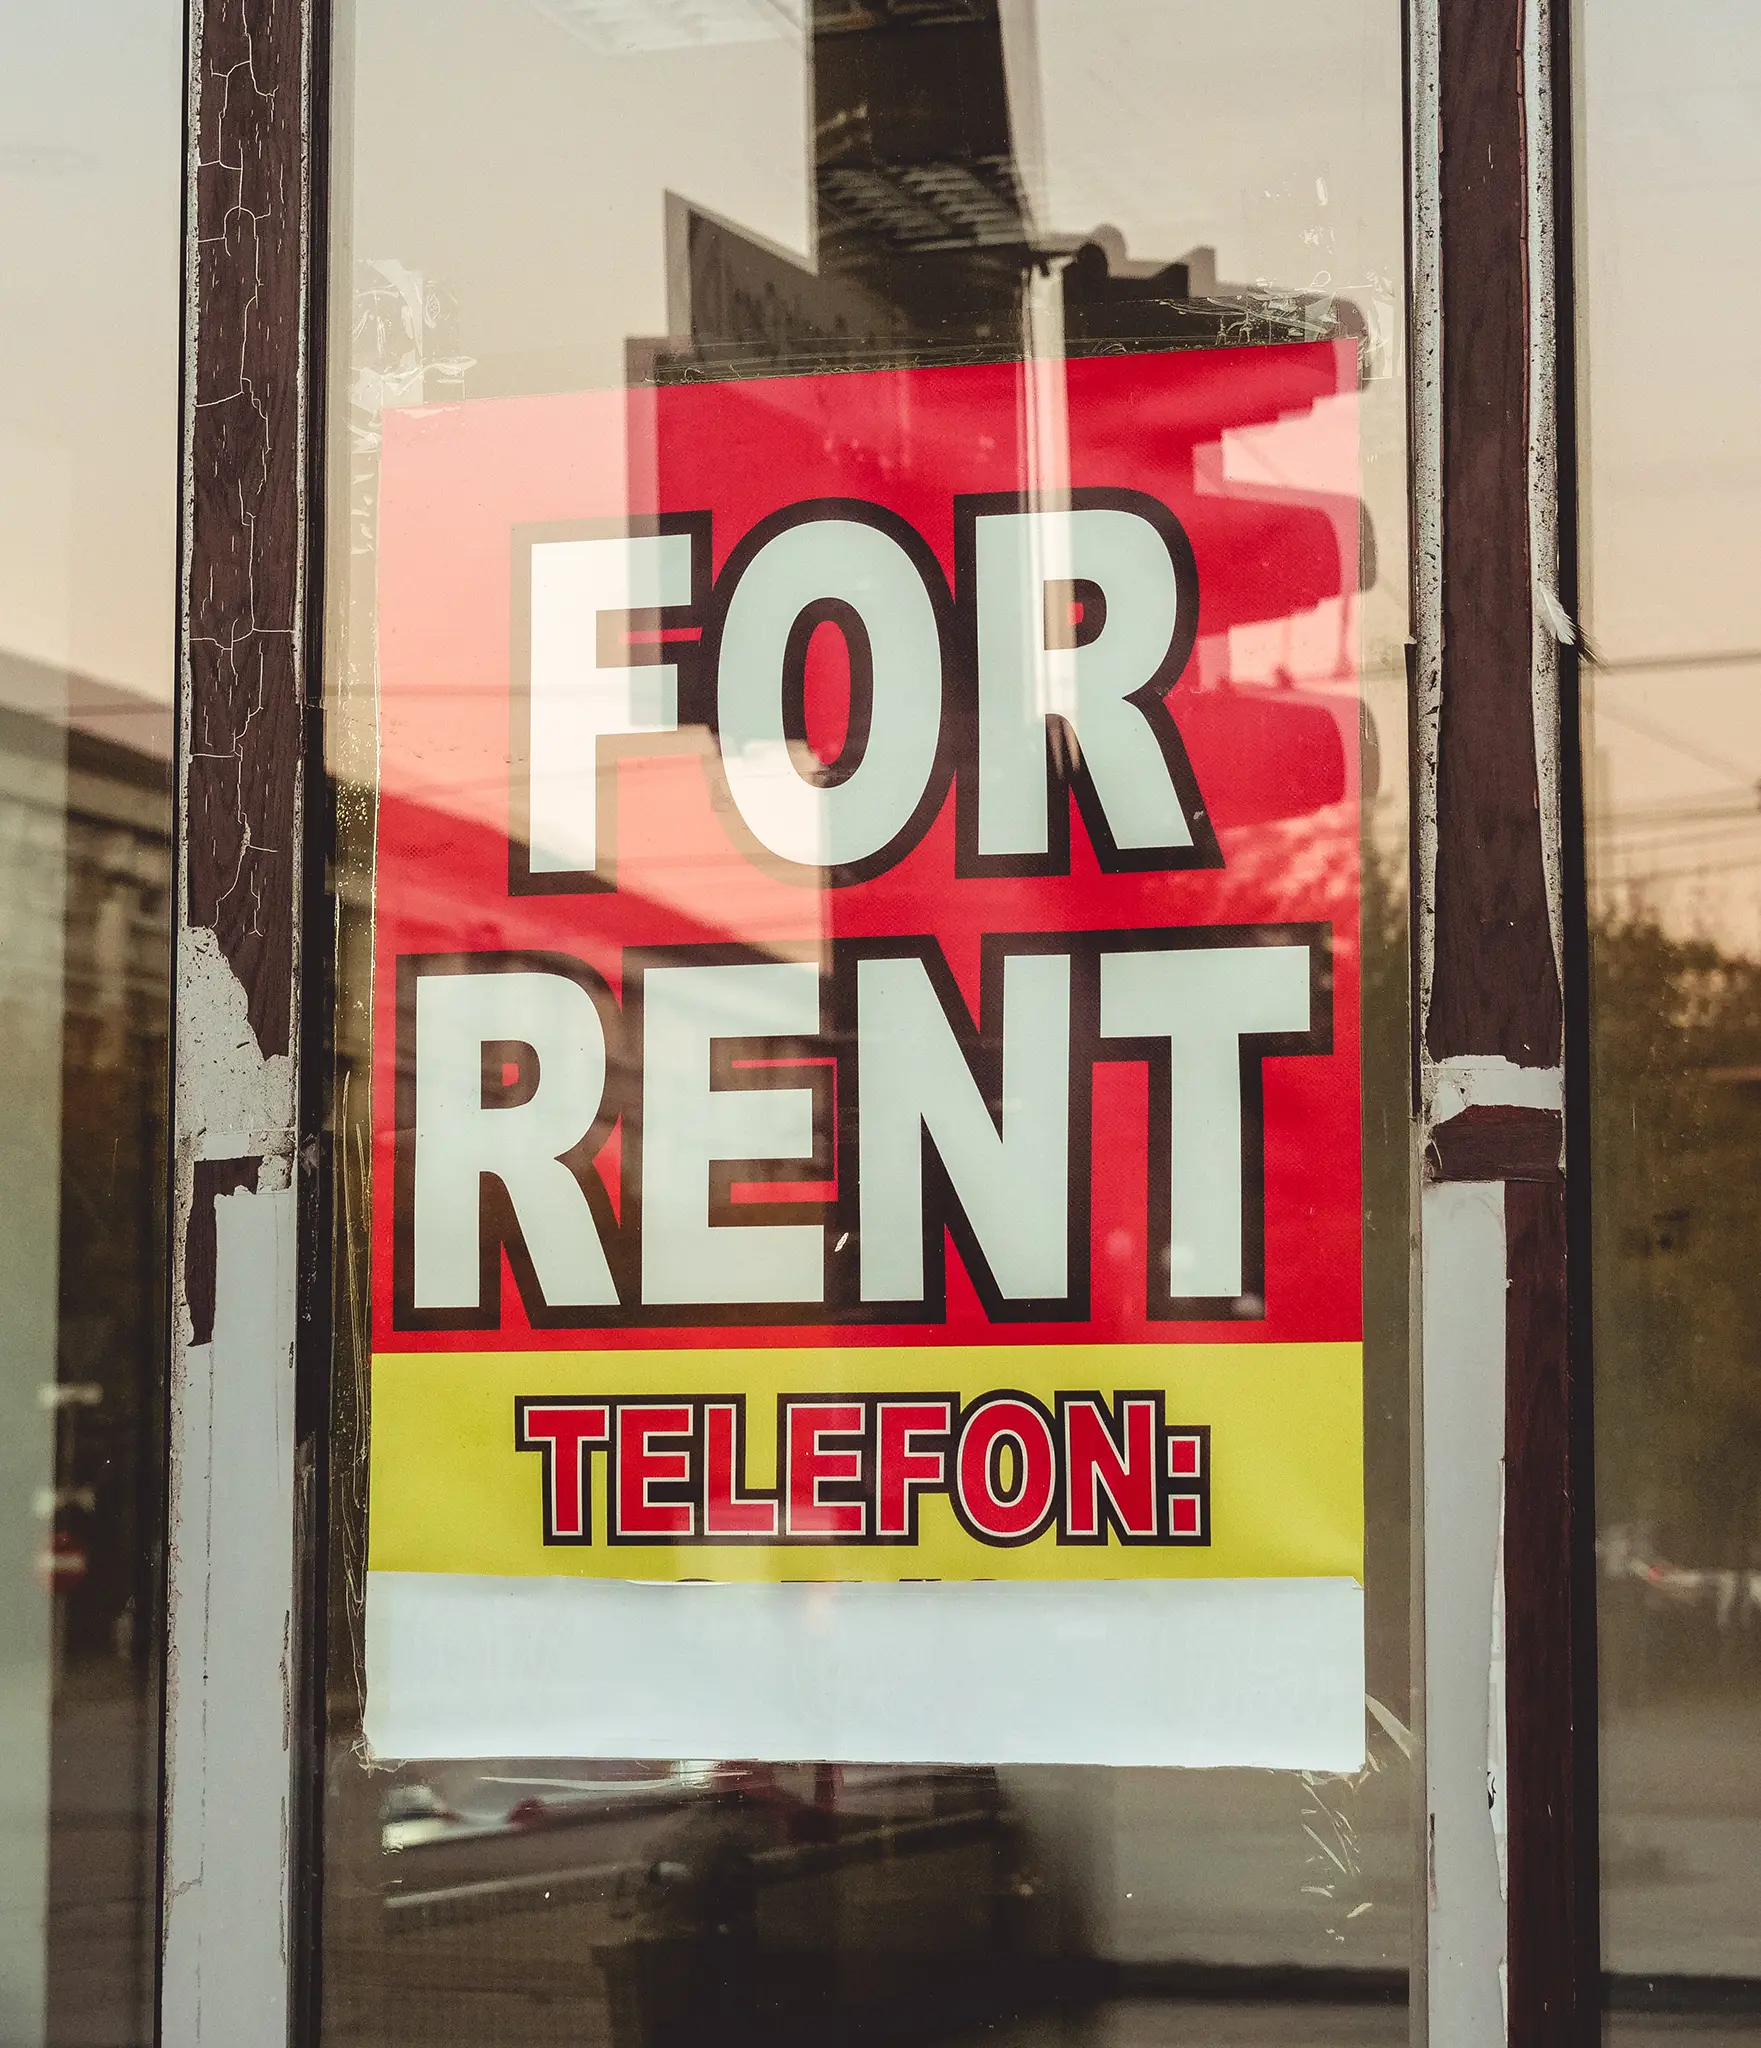 A For Rent sign in a window